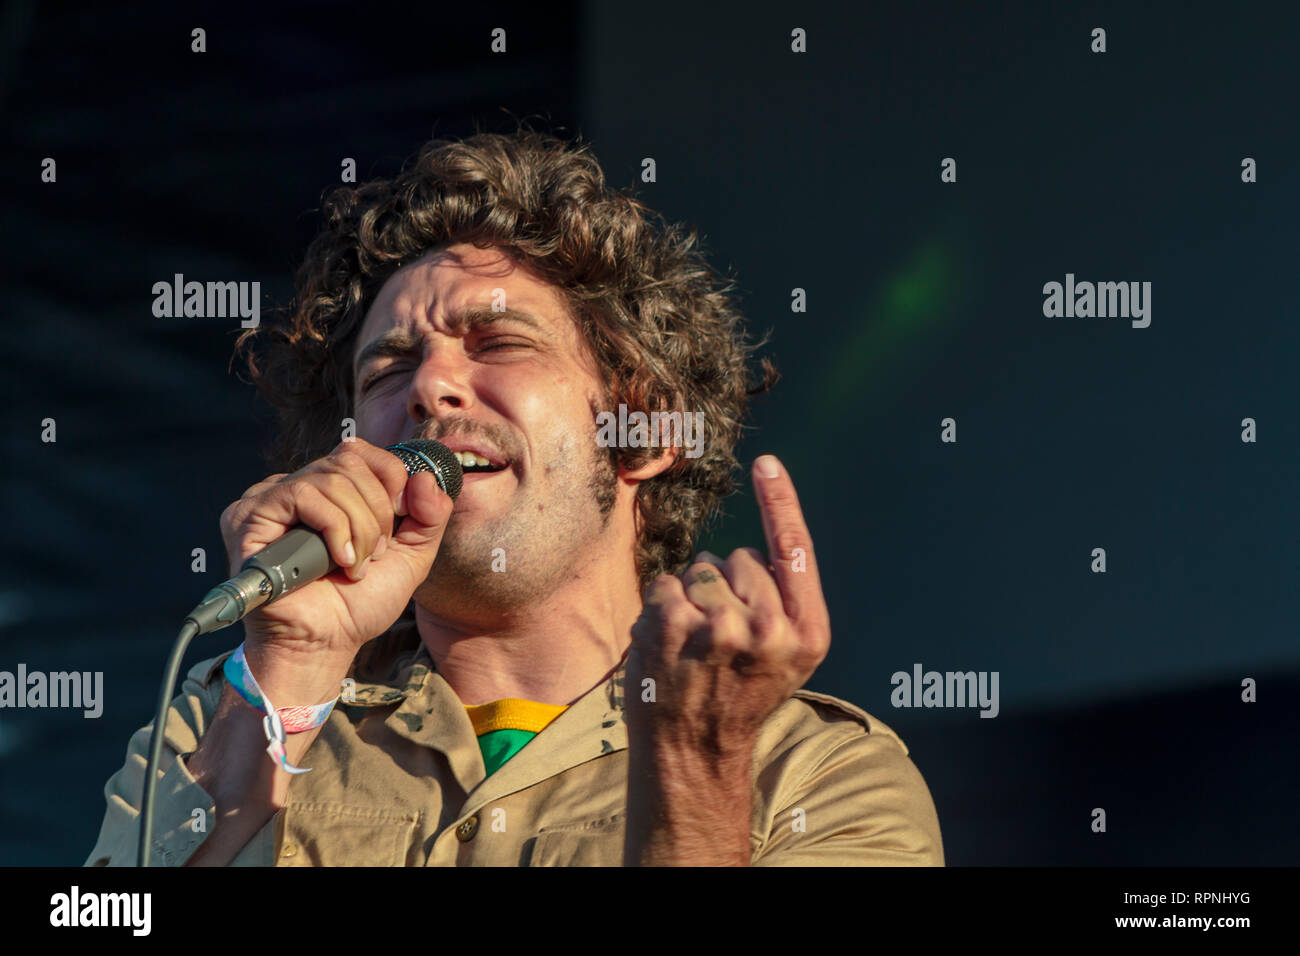 Musician Brooks Nielsen of the band The Growlers performs at